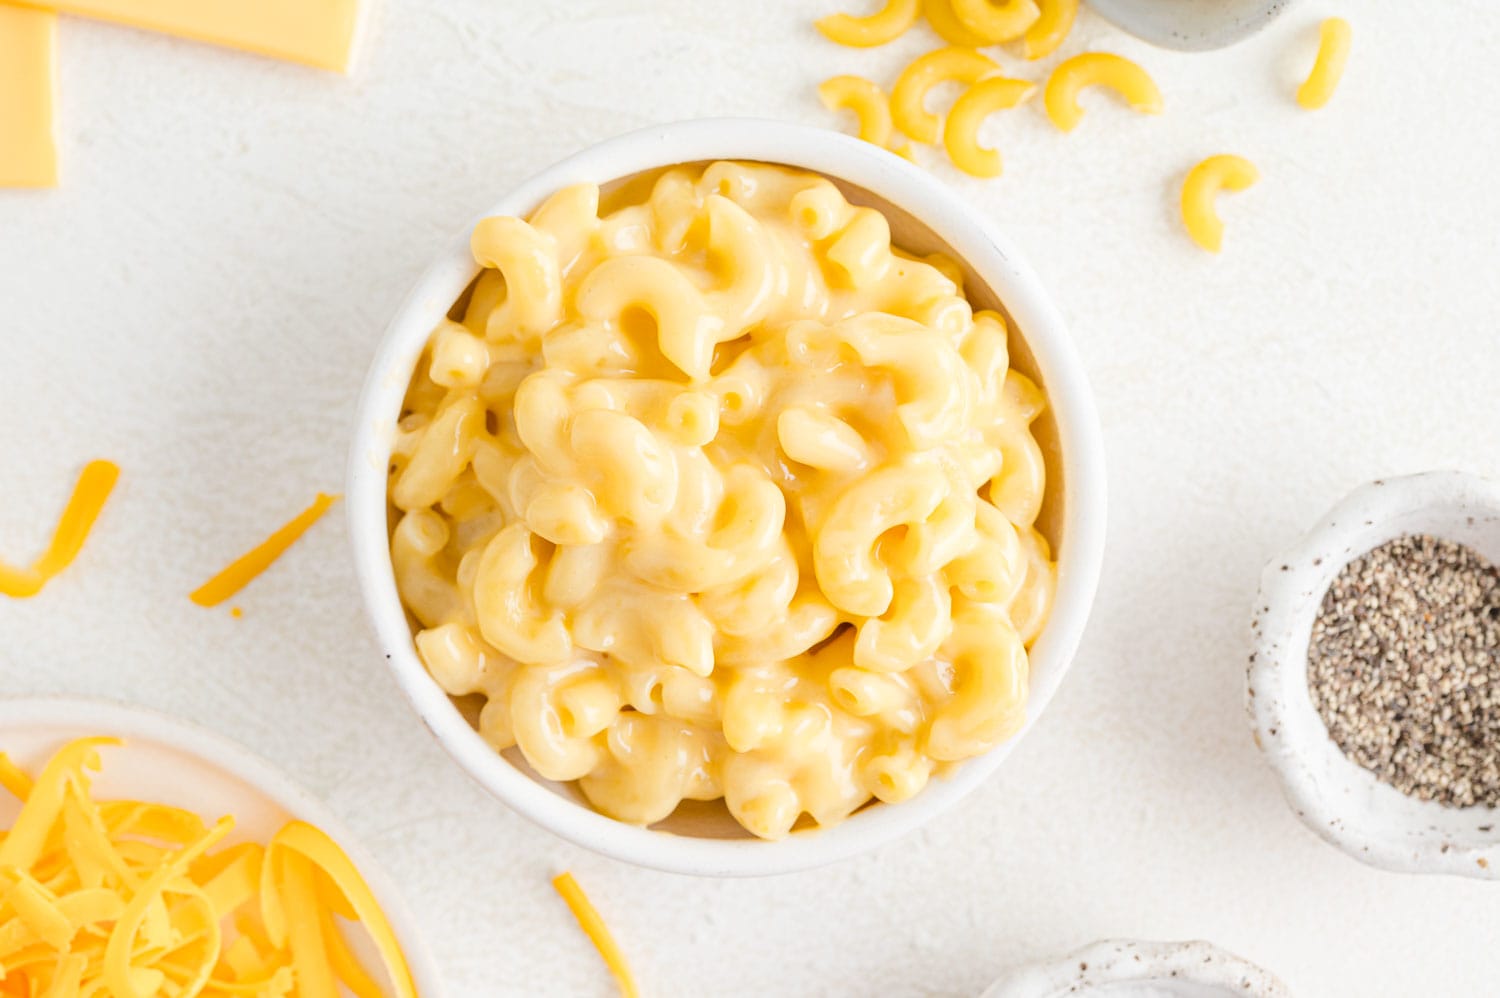 Delicious & Creamy Microwave Mac & Cheese in 5 Minutes! - Bake It